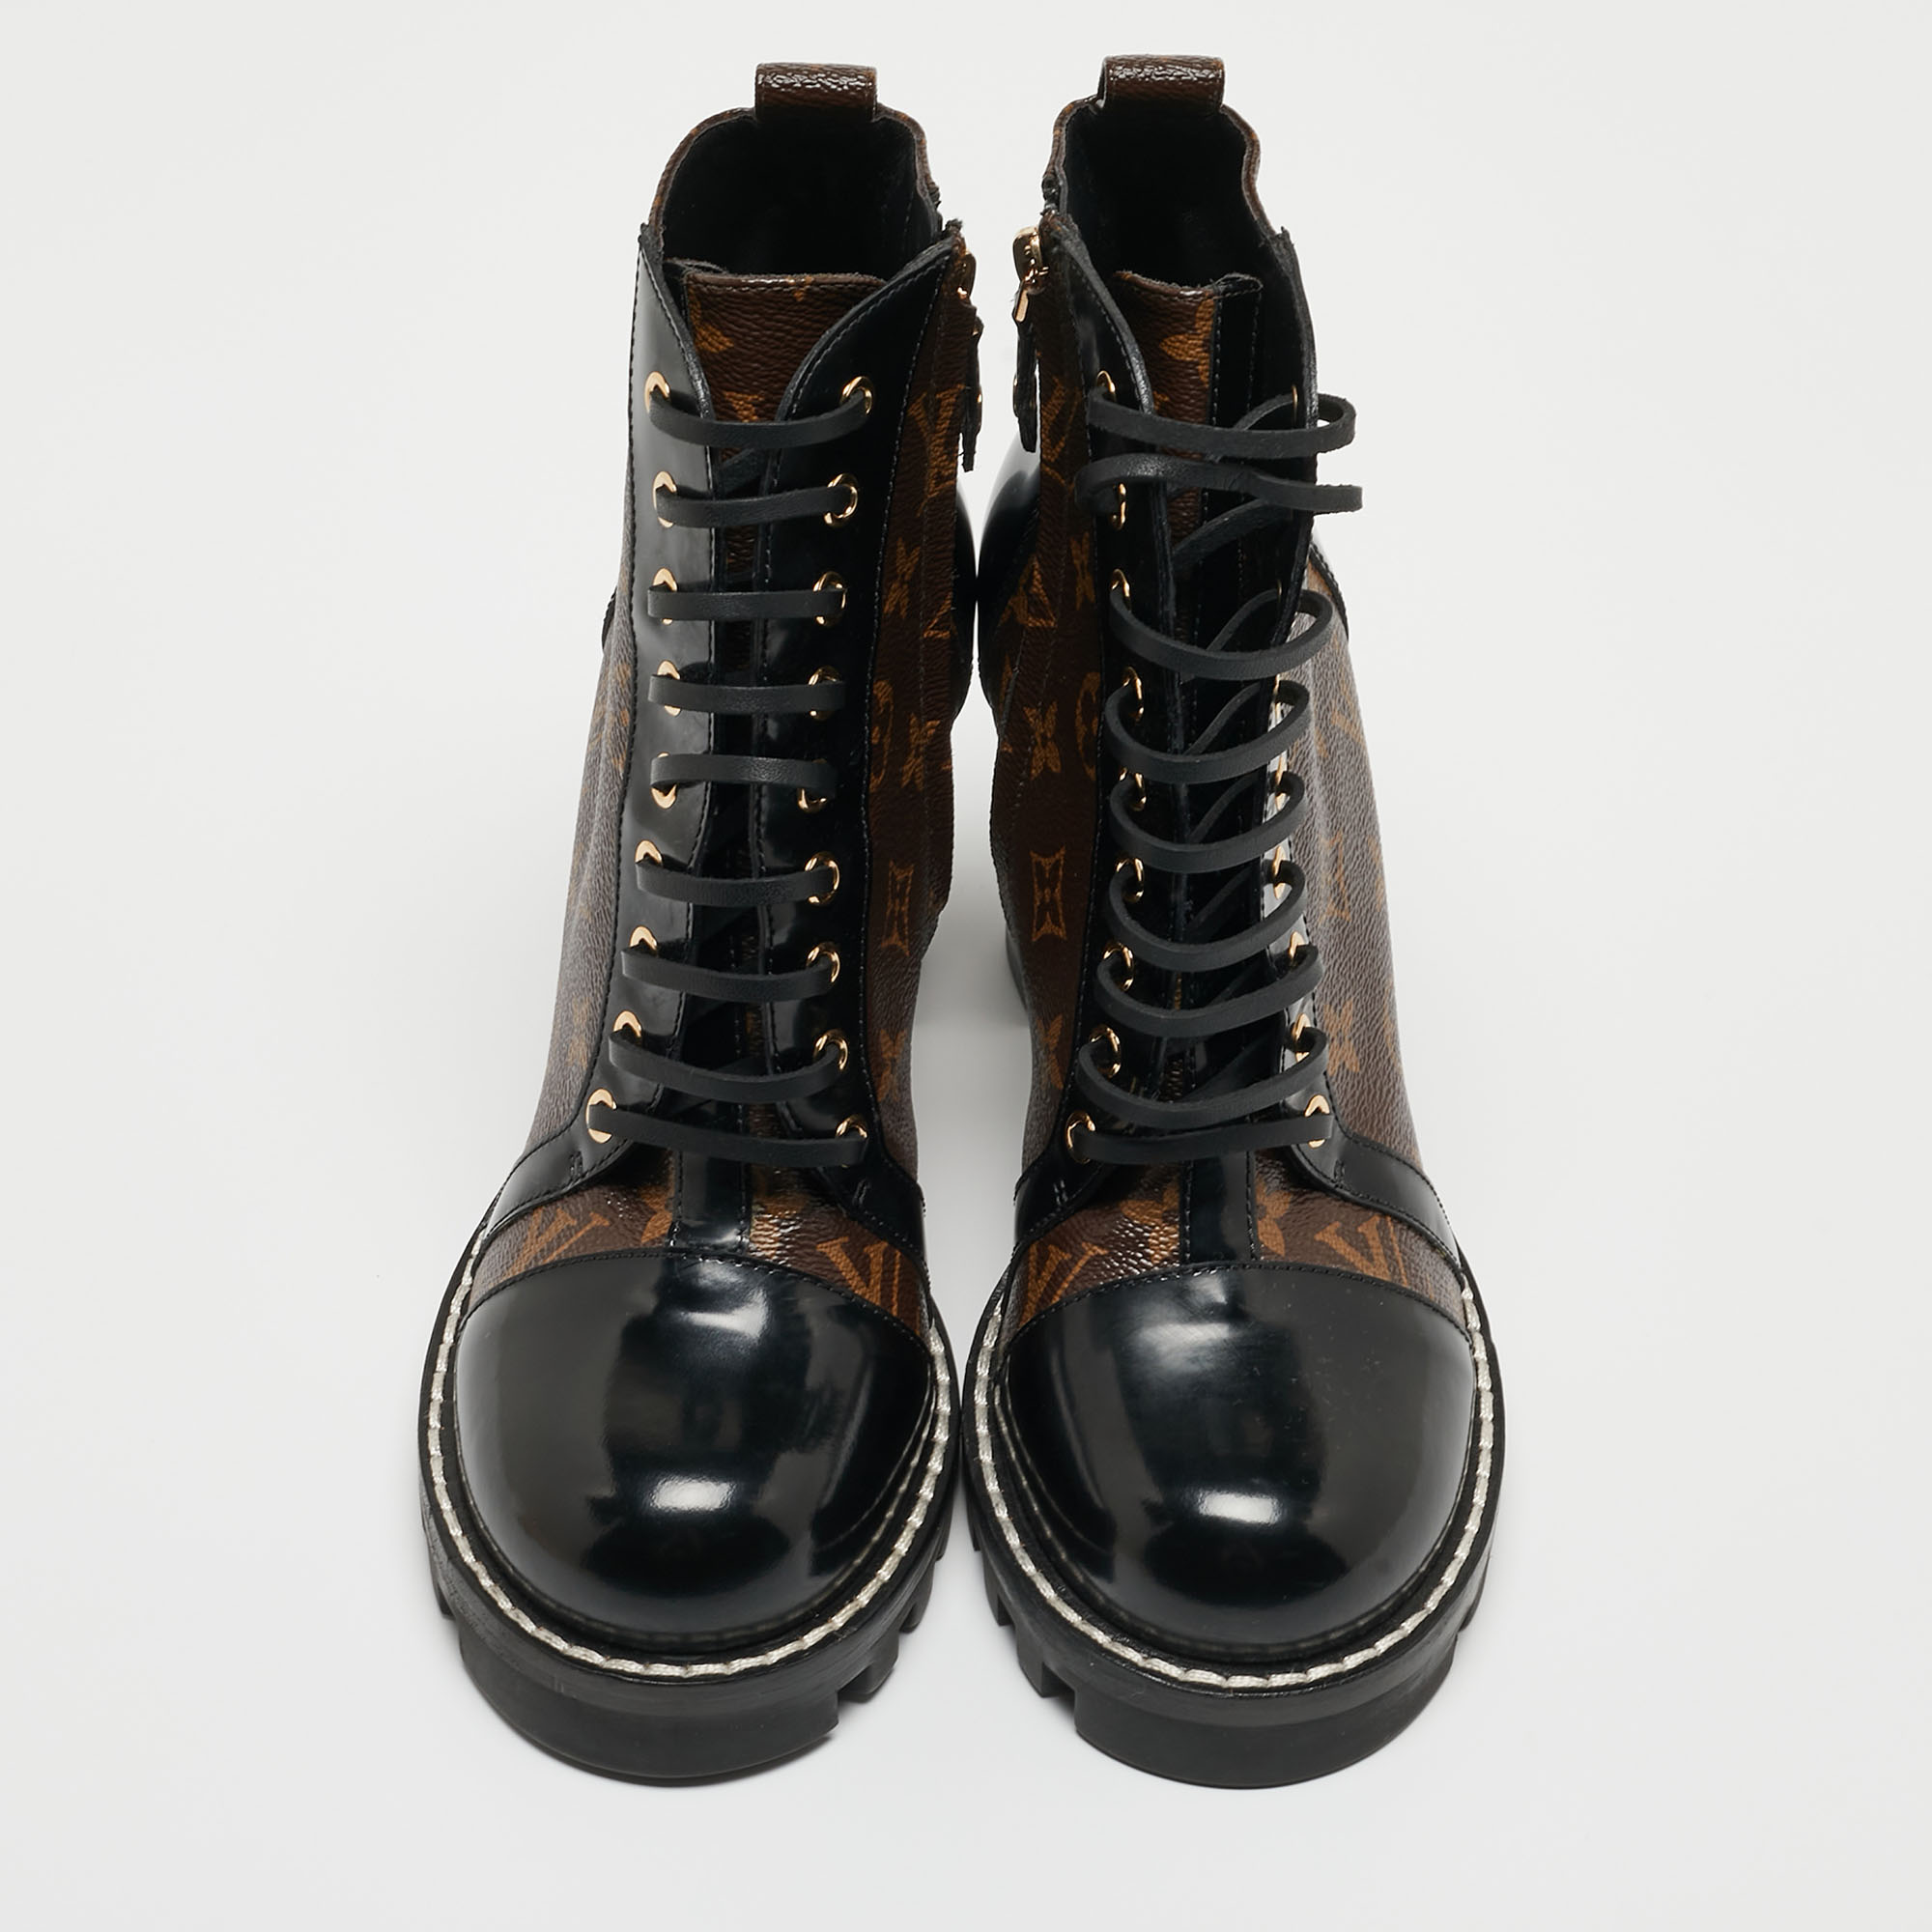 Louis Vuitton Black/Brown Patent Leather And Monogram Canvas Star Trail Boots Size 40